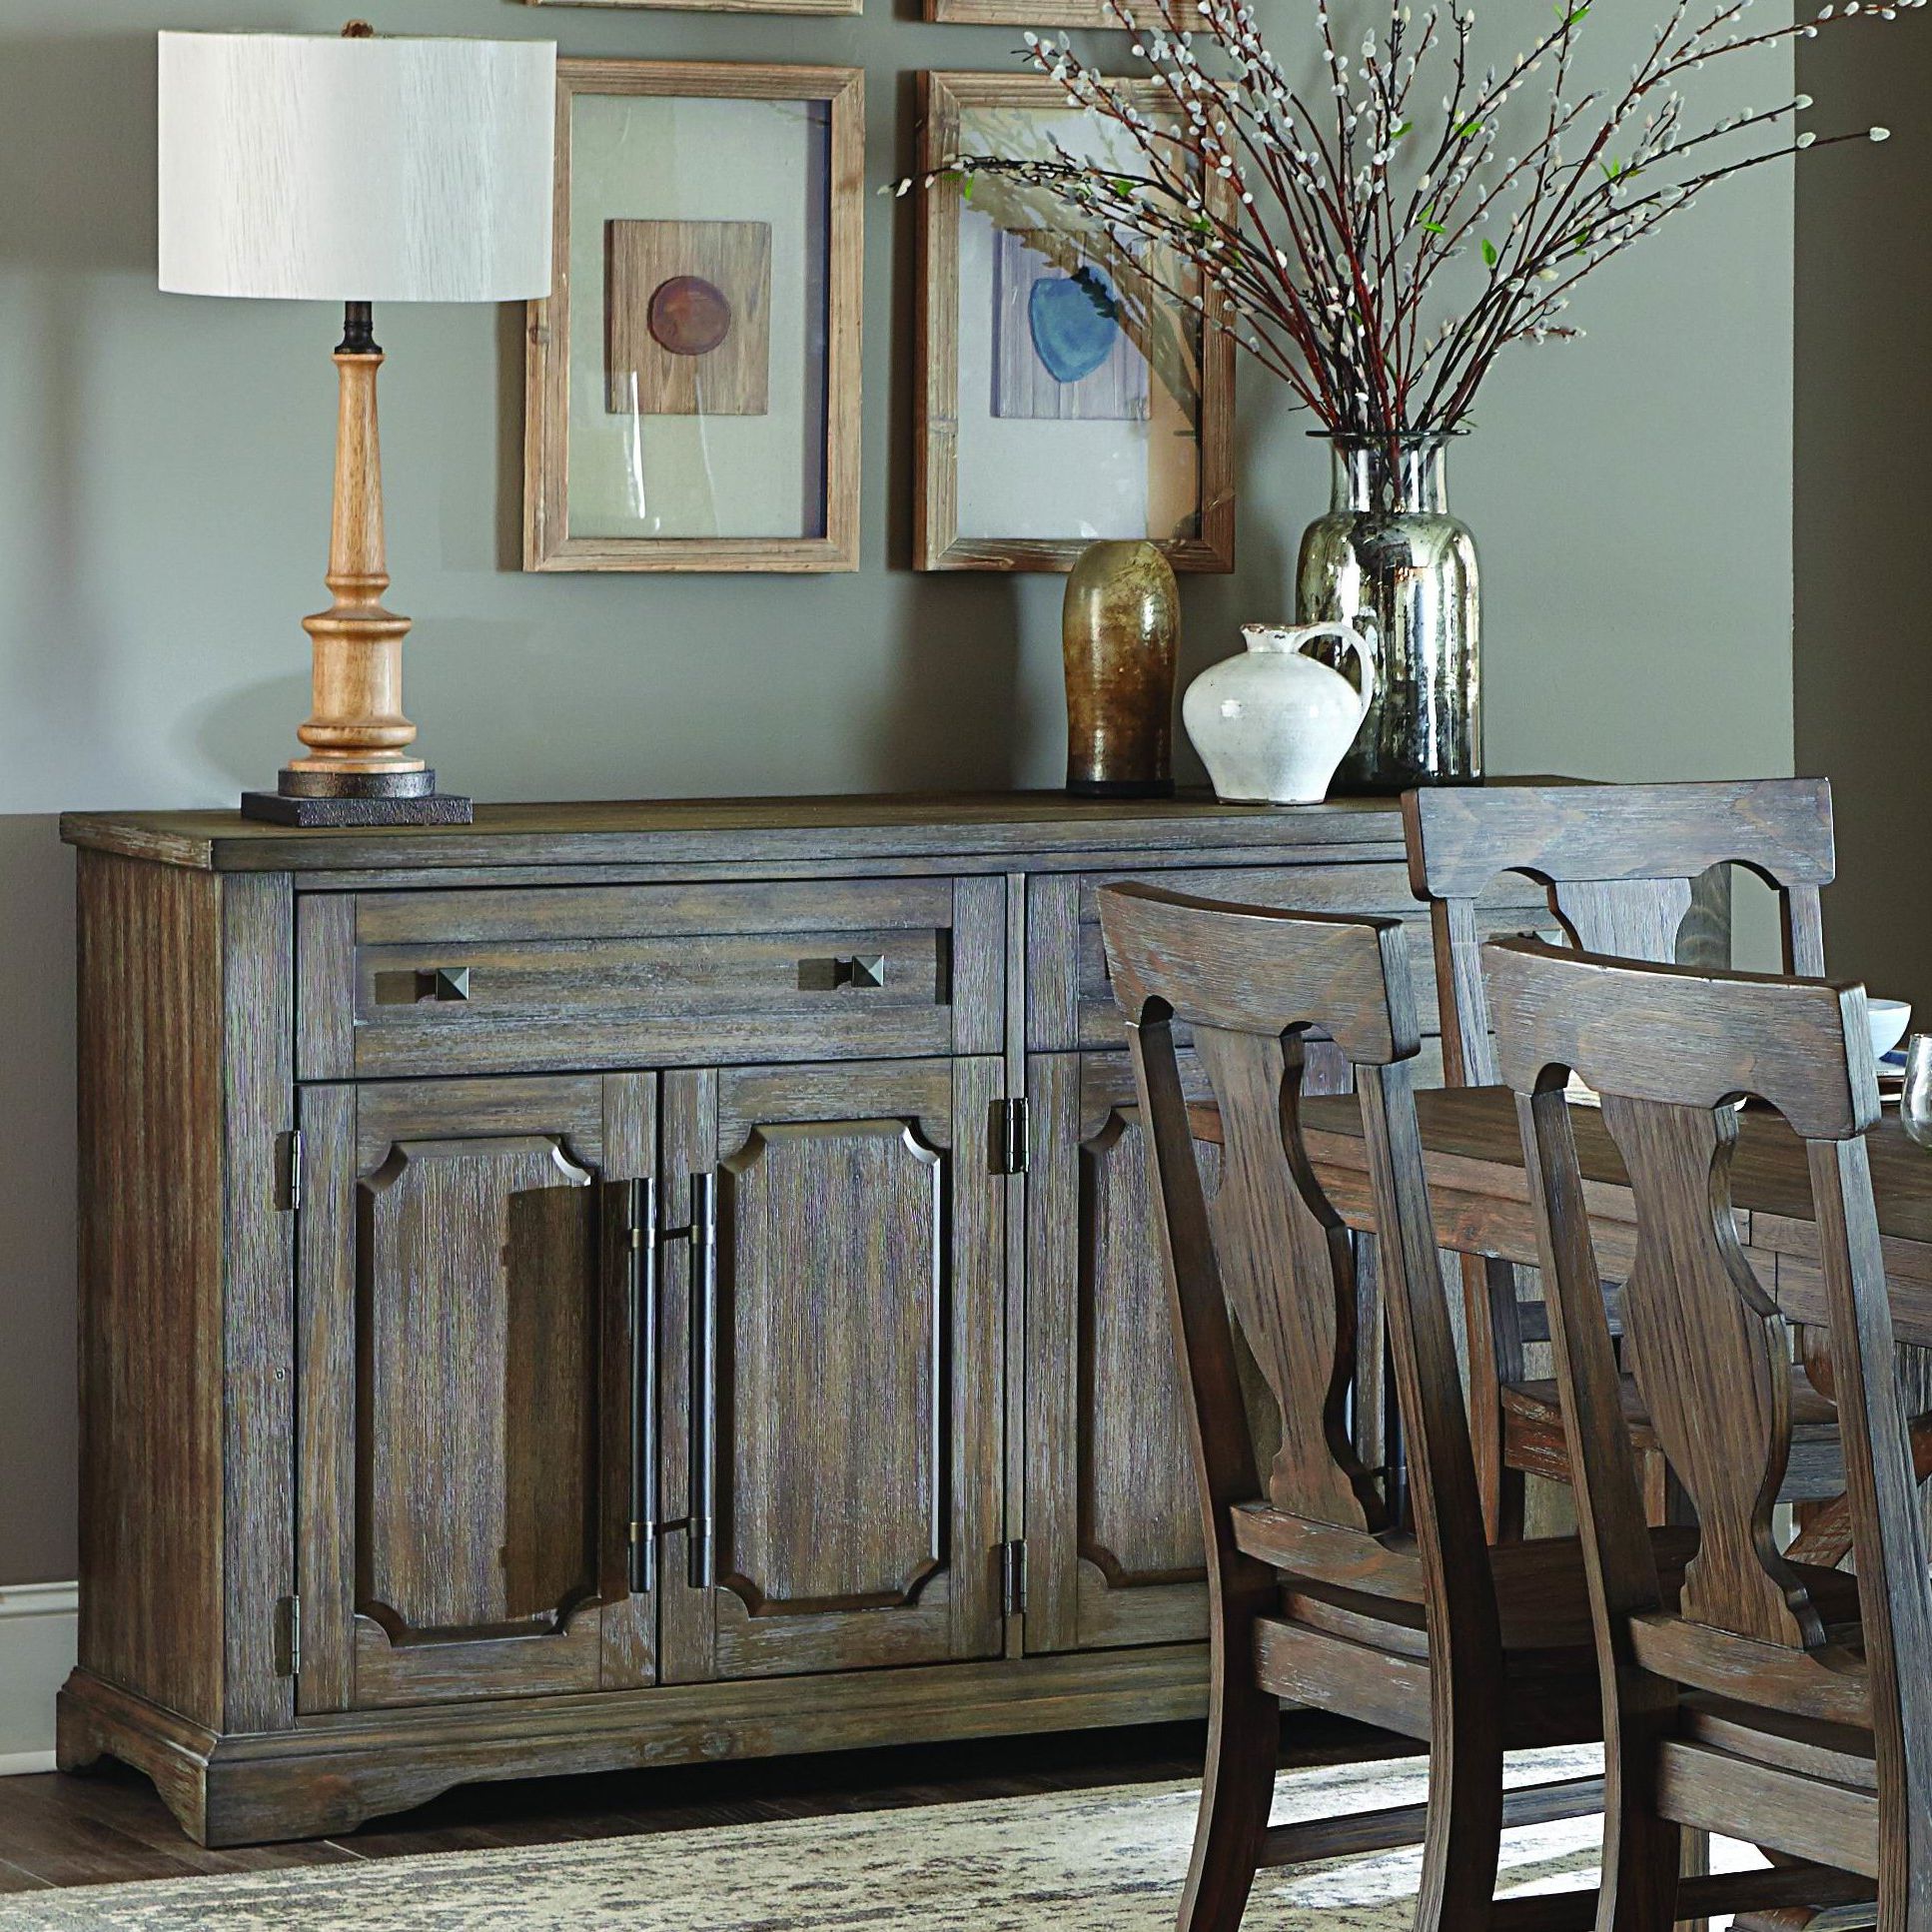 Darby Home Co Phyllis Sideboard & Reviews | Wayfair With Phyllis Sideboards (View 1 of 20)